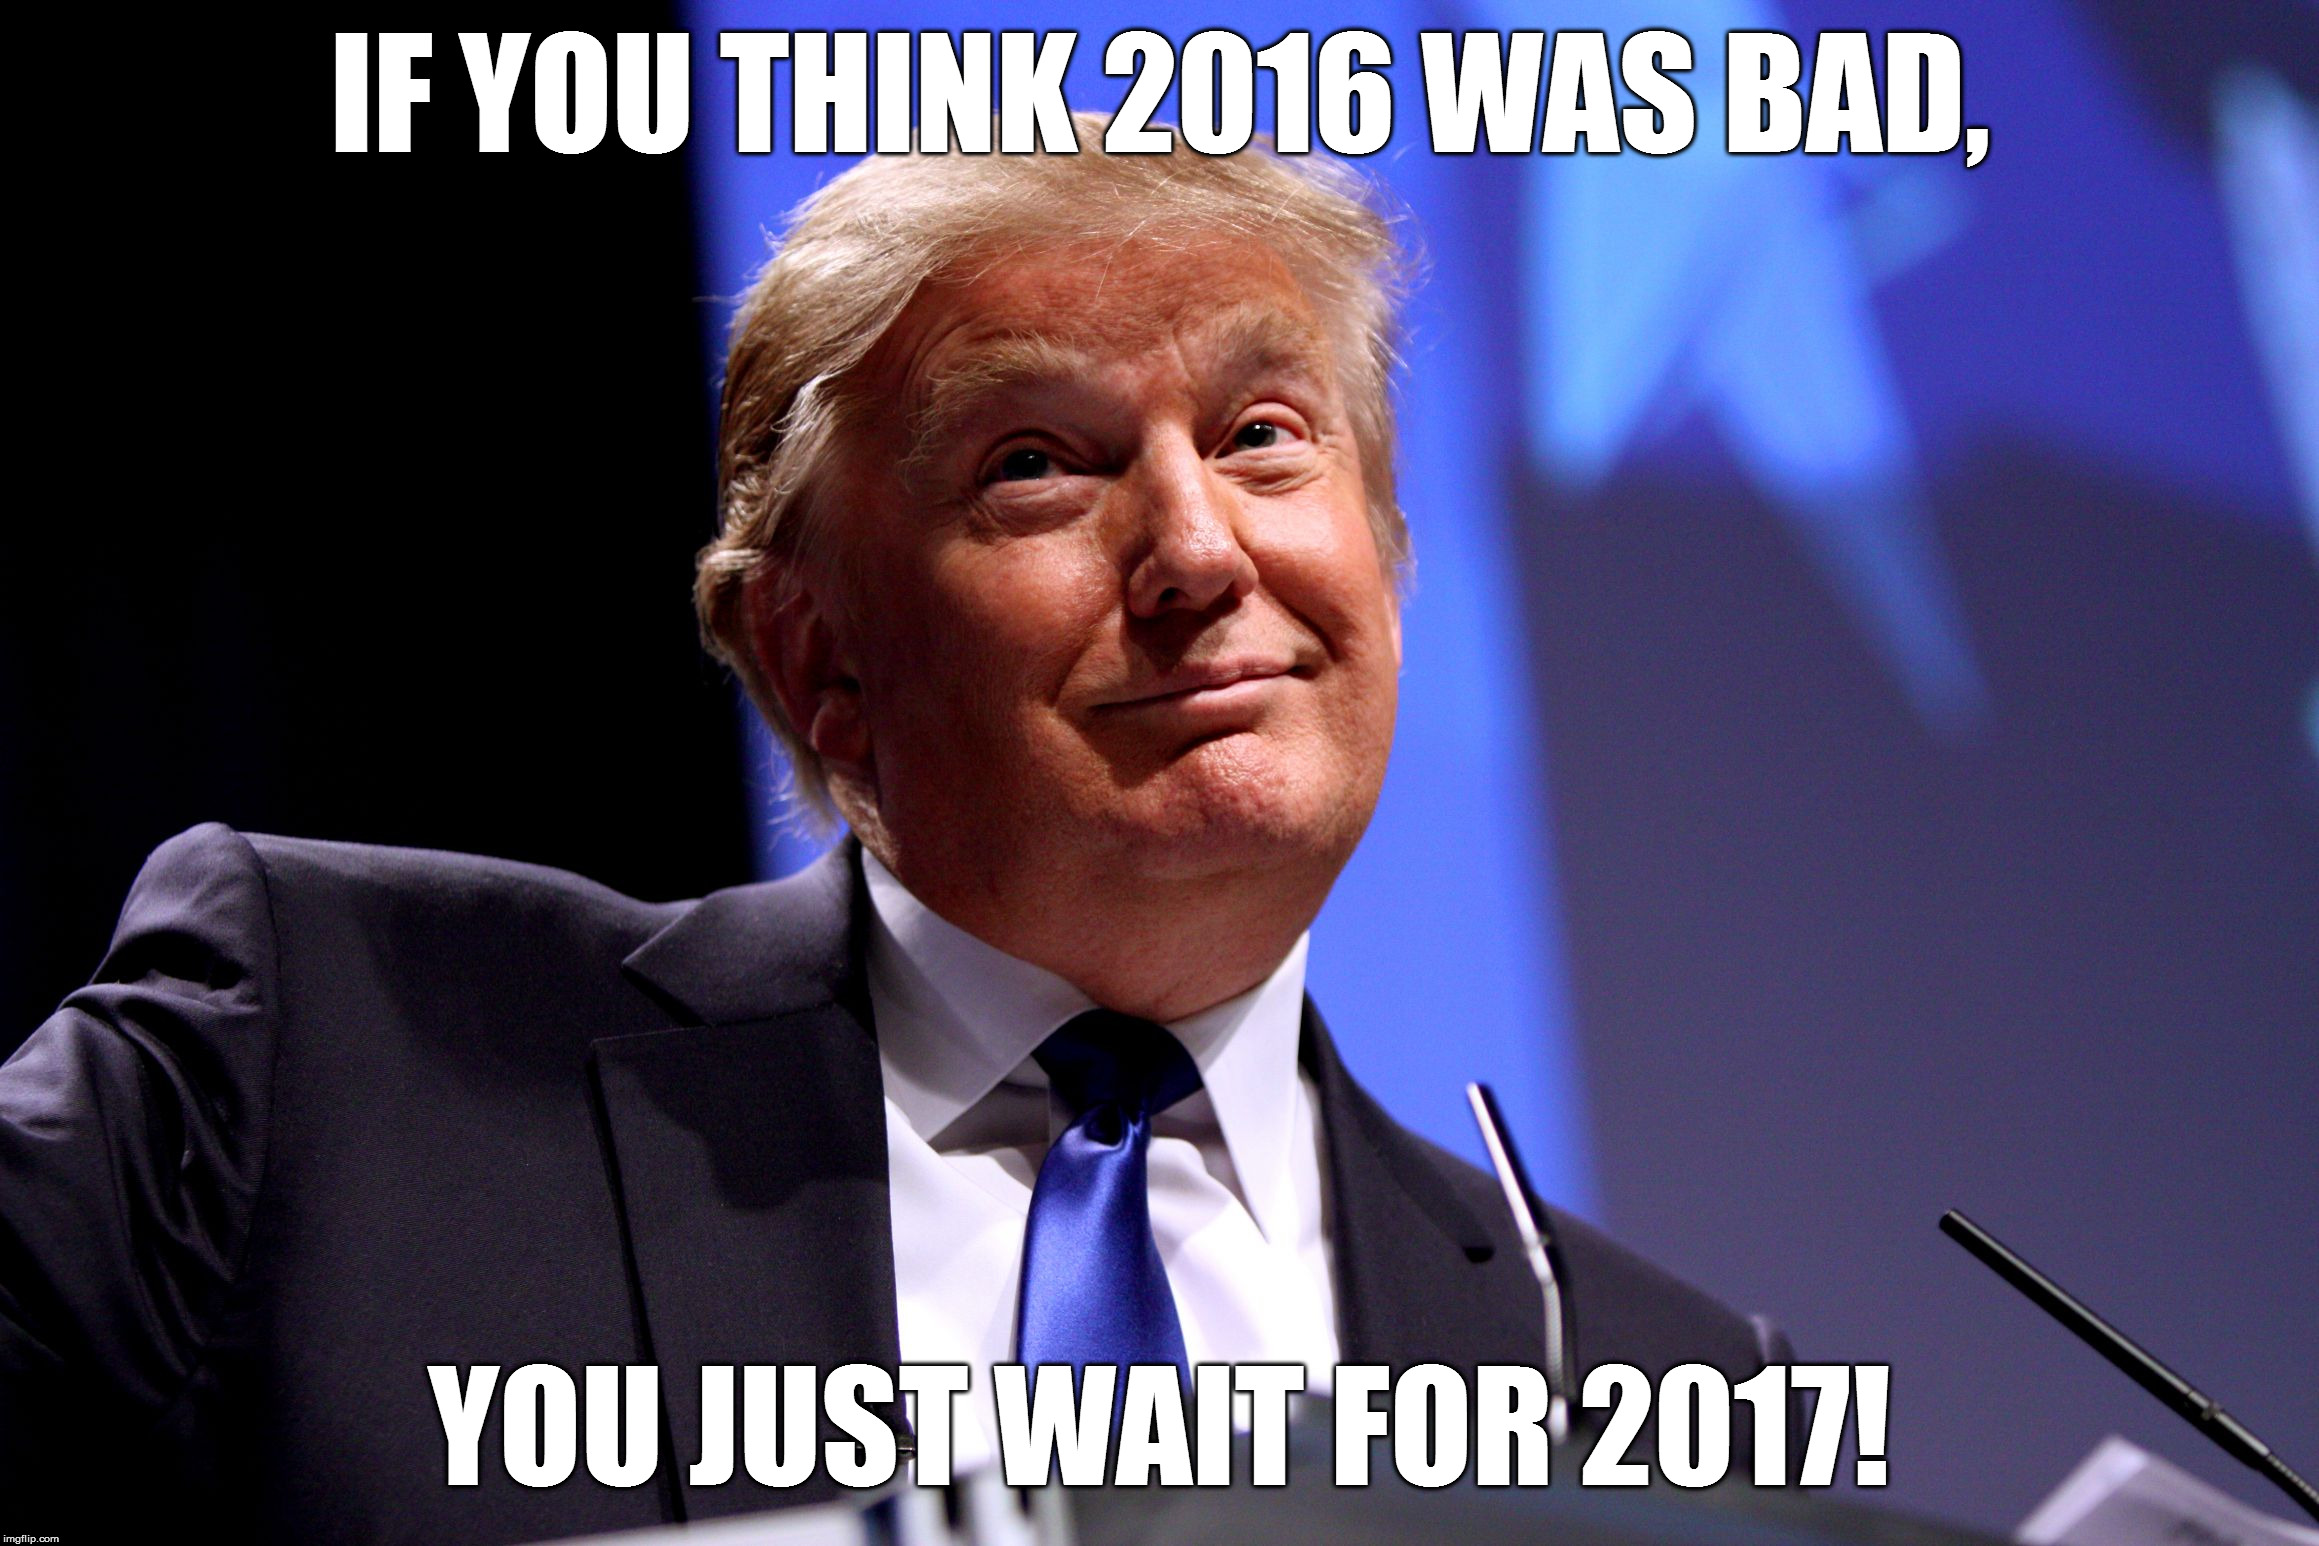 Donald Trump No2 | IF YOU THINK 2016 WAS BAD, YOU JUST WAIT FOR 2017! | image tagged in donald trump no2 | made w/ Imgflip meme maker